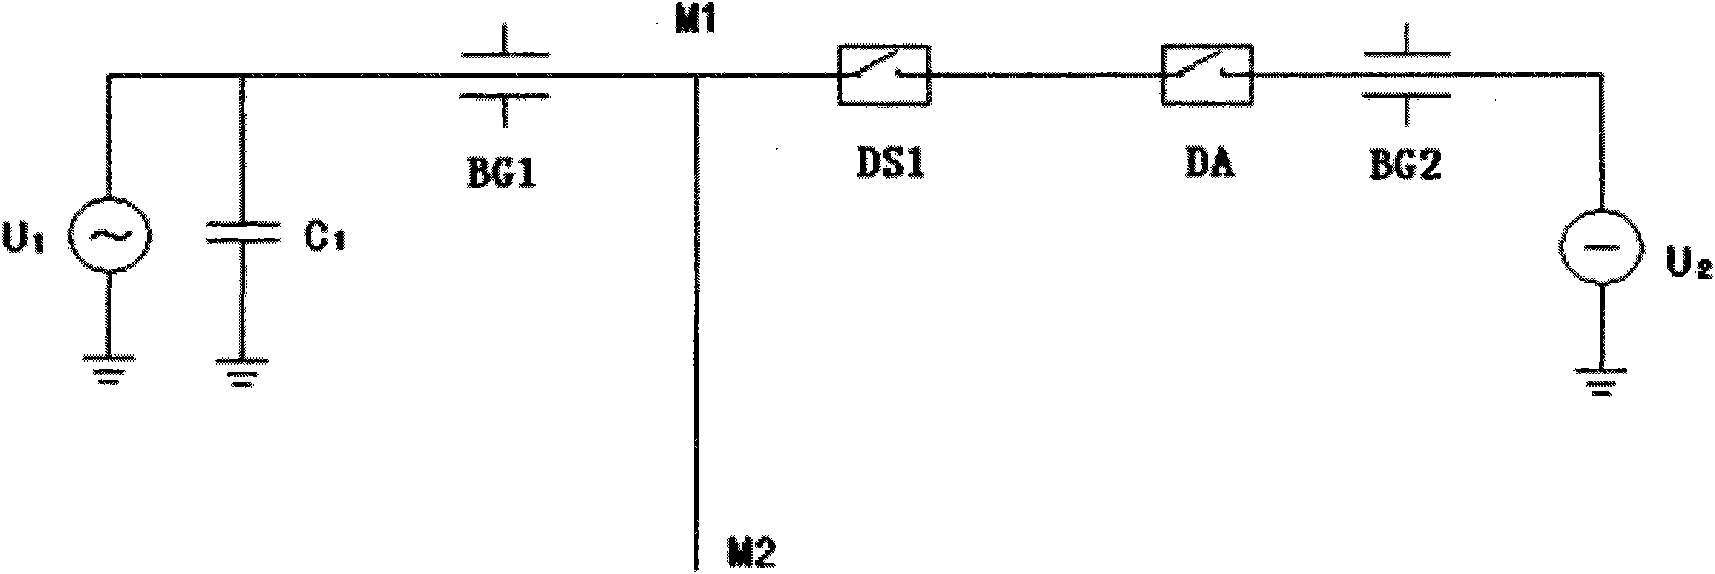 Method for simulating GIS transformer substation to produce very fast transient overvoltage (VFTO) and test circuit